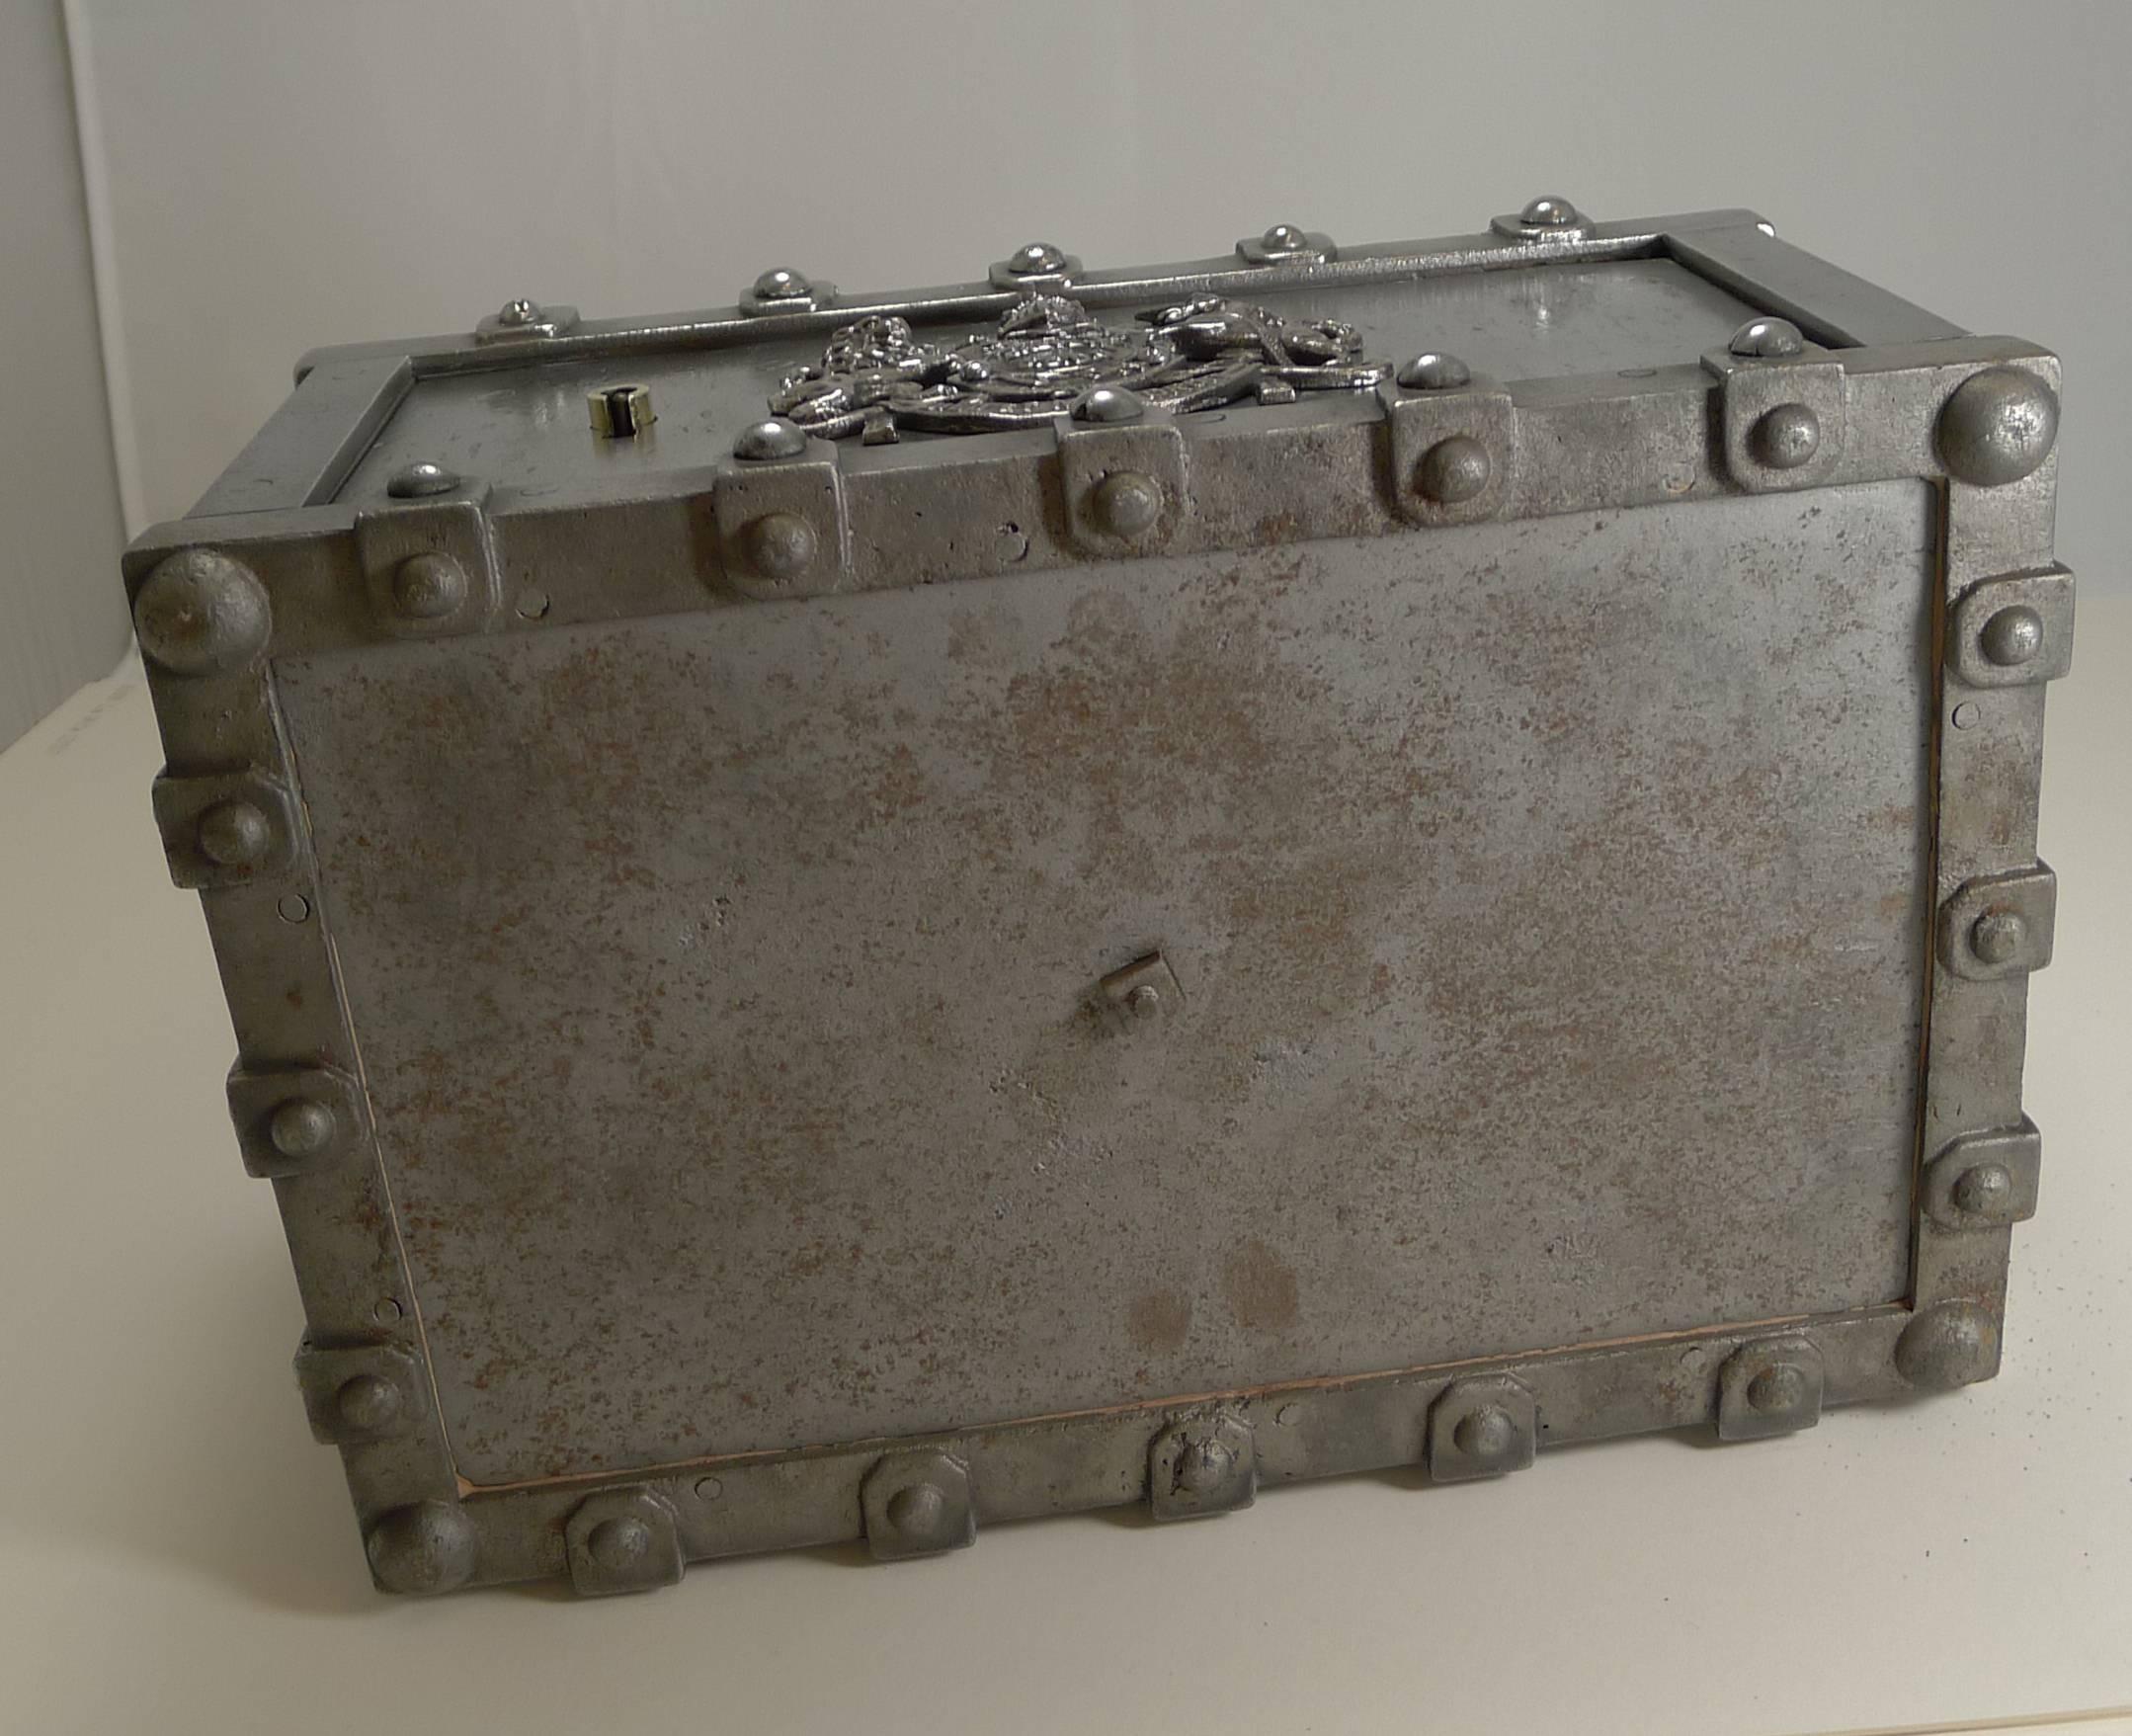 A stunning and very hefty travelling safe, made in France in circa 1870.

The cast iron has been professionally re-polished to create a modern industrial looking gem. This incombustible safe is lined inside, the lining being instrumental in